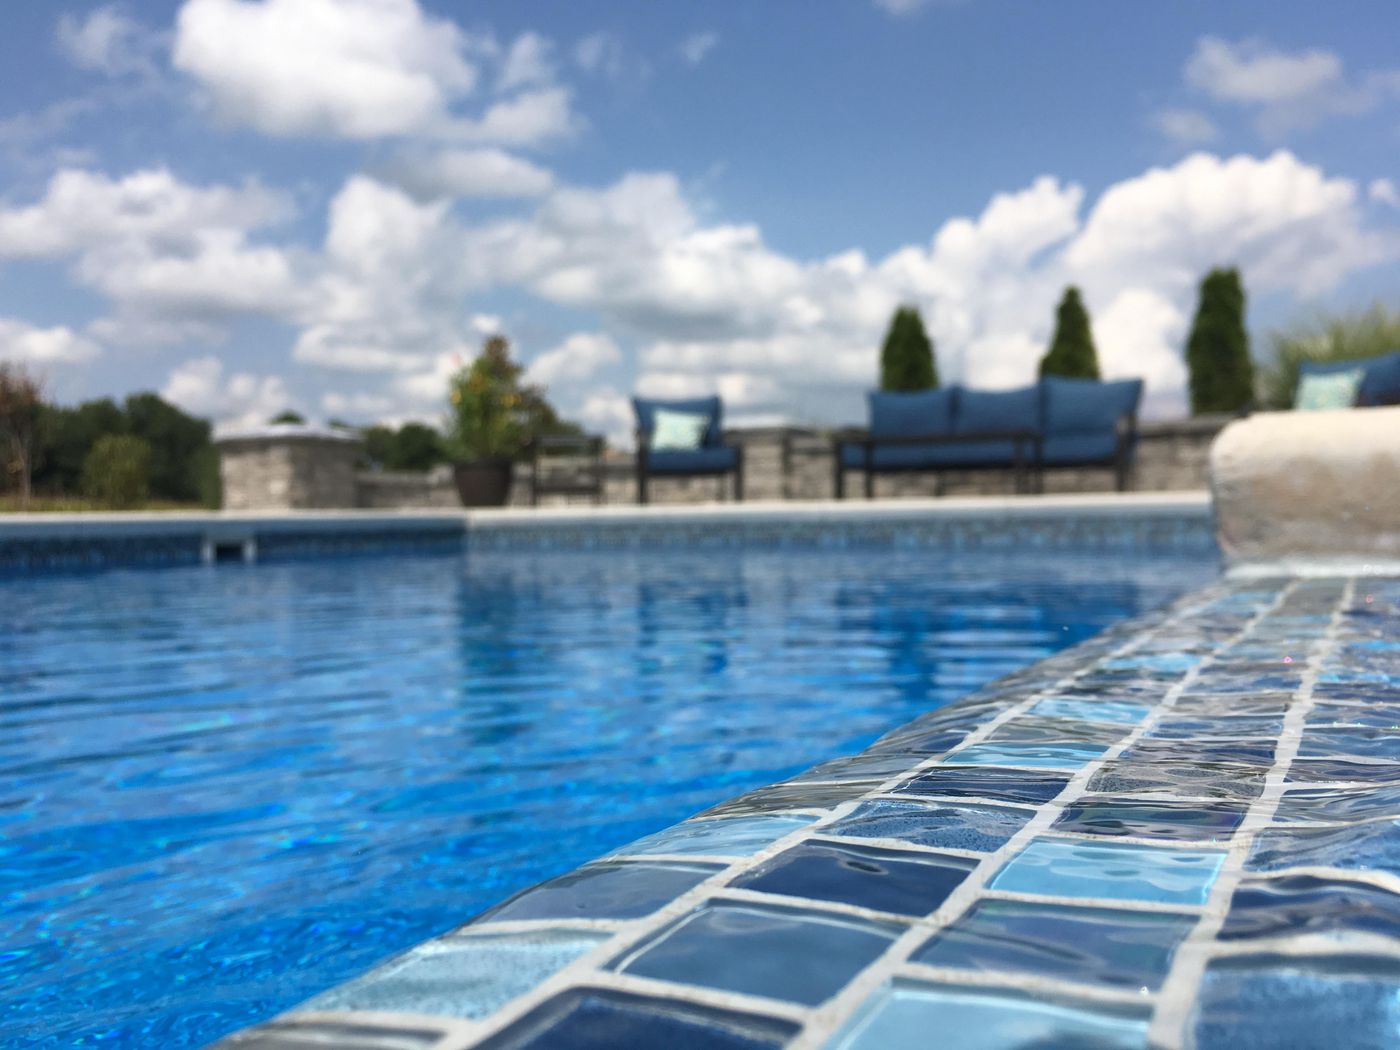 Top 5 Swimming Pool Builders in the Northern Virginia DC Area